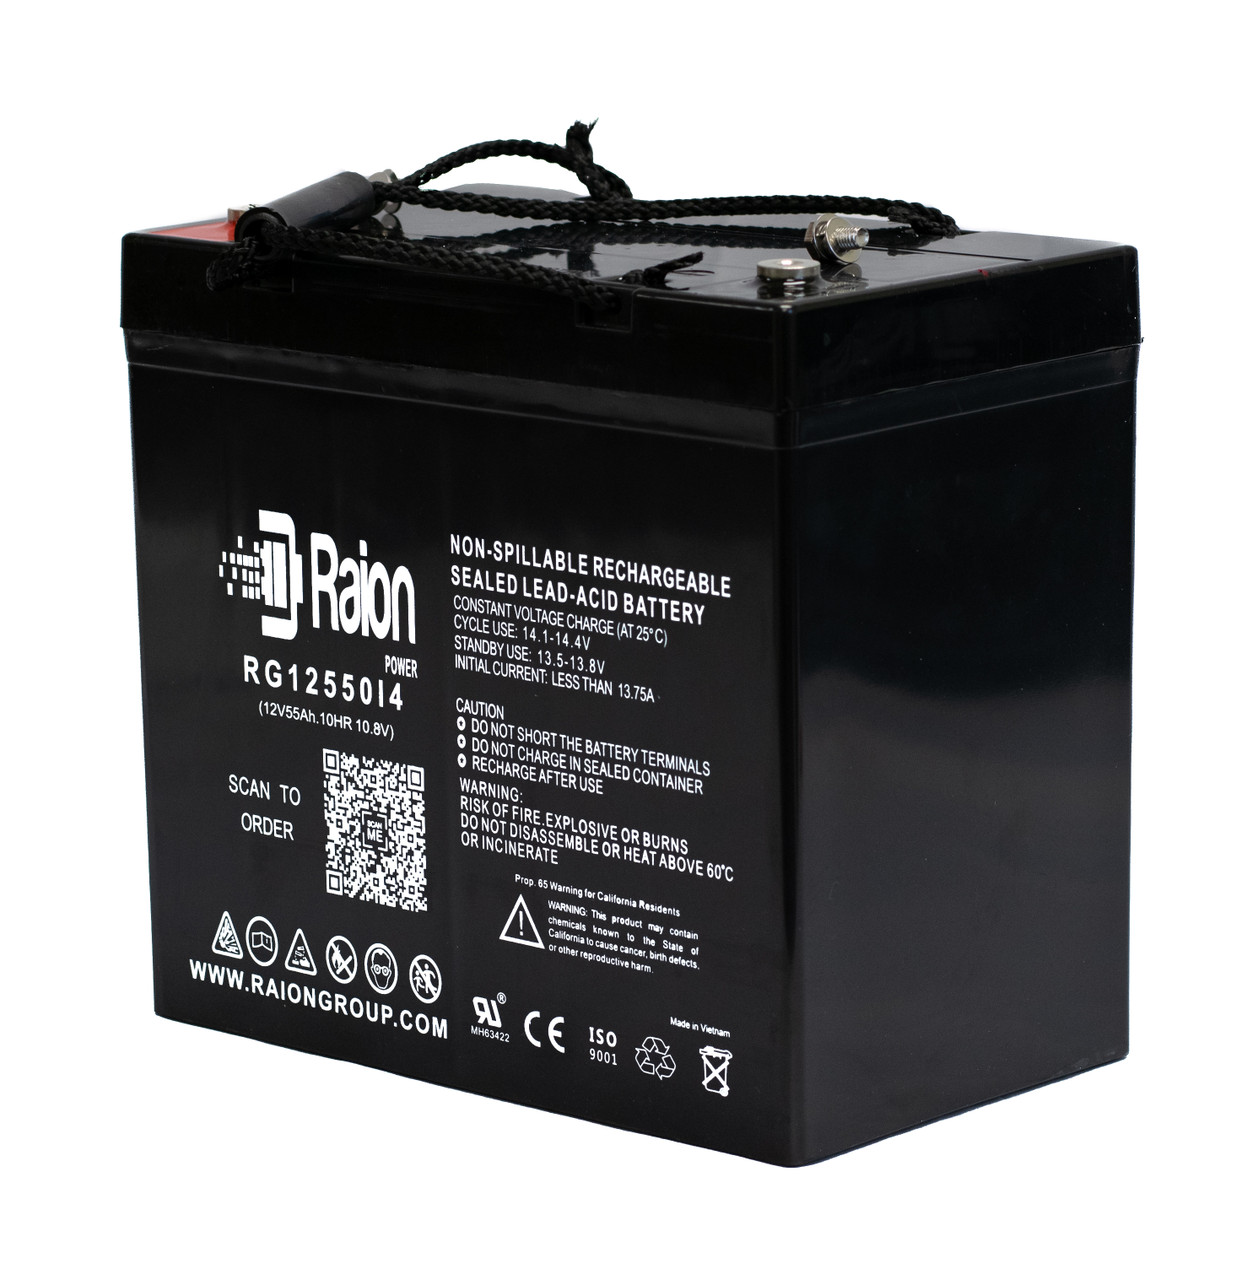 Raion Power 12V 55Ah 22NF Mobility Scooter Battery Replacement for Quickie V521